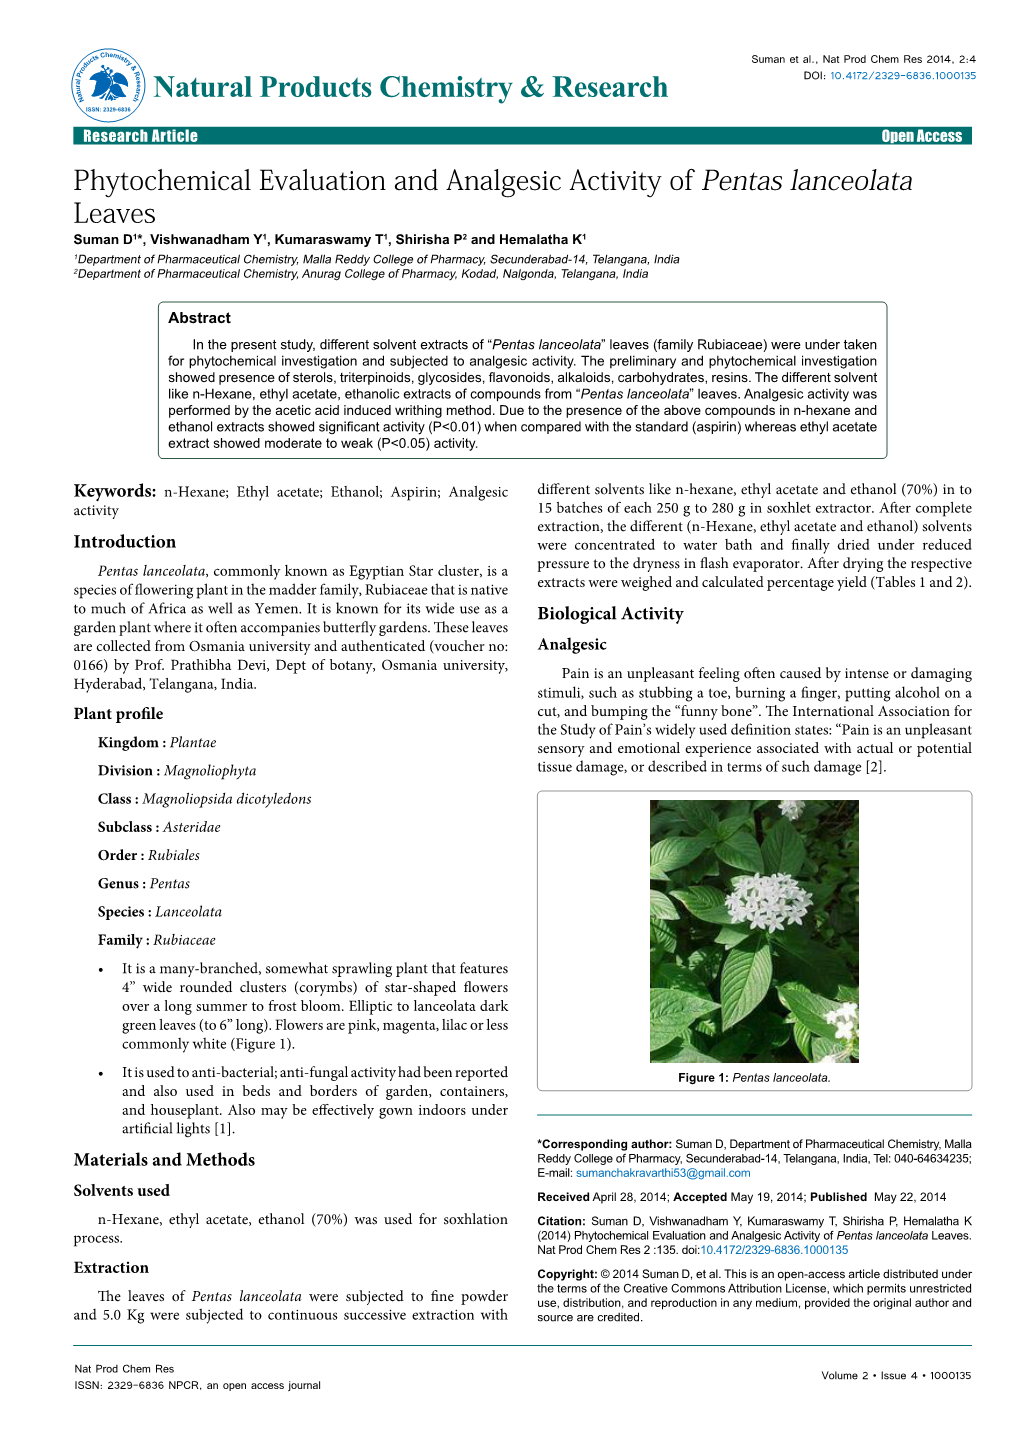 Phytochemical Evaluation and Analgesic Activity of Pentas